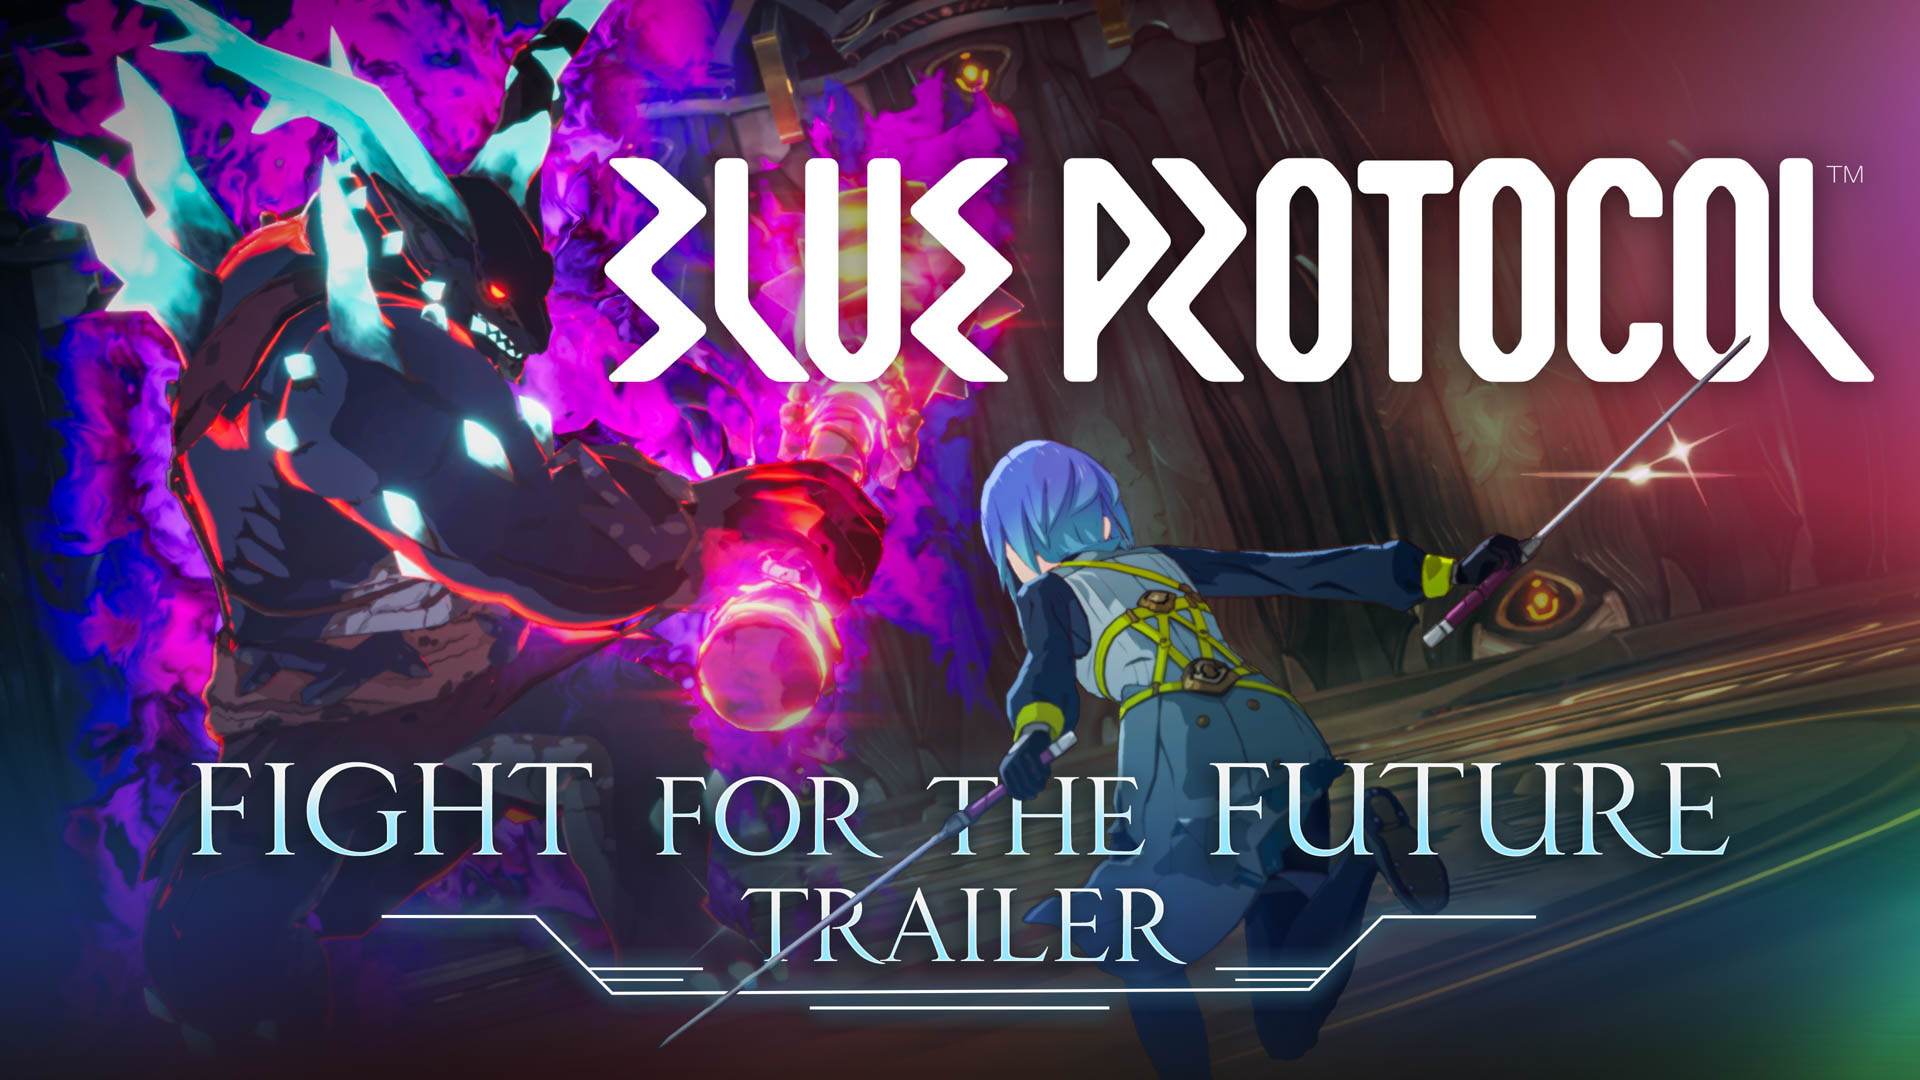 Blue Protocol' is an anime come to life RPG that launches in 2023